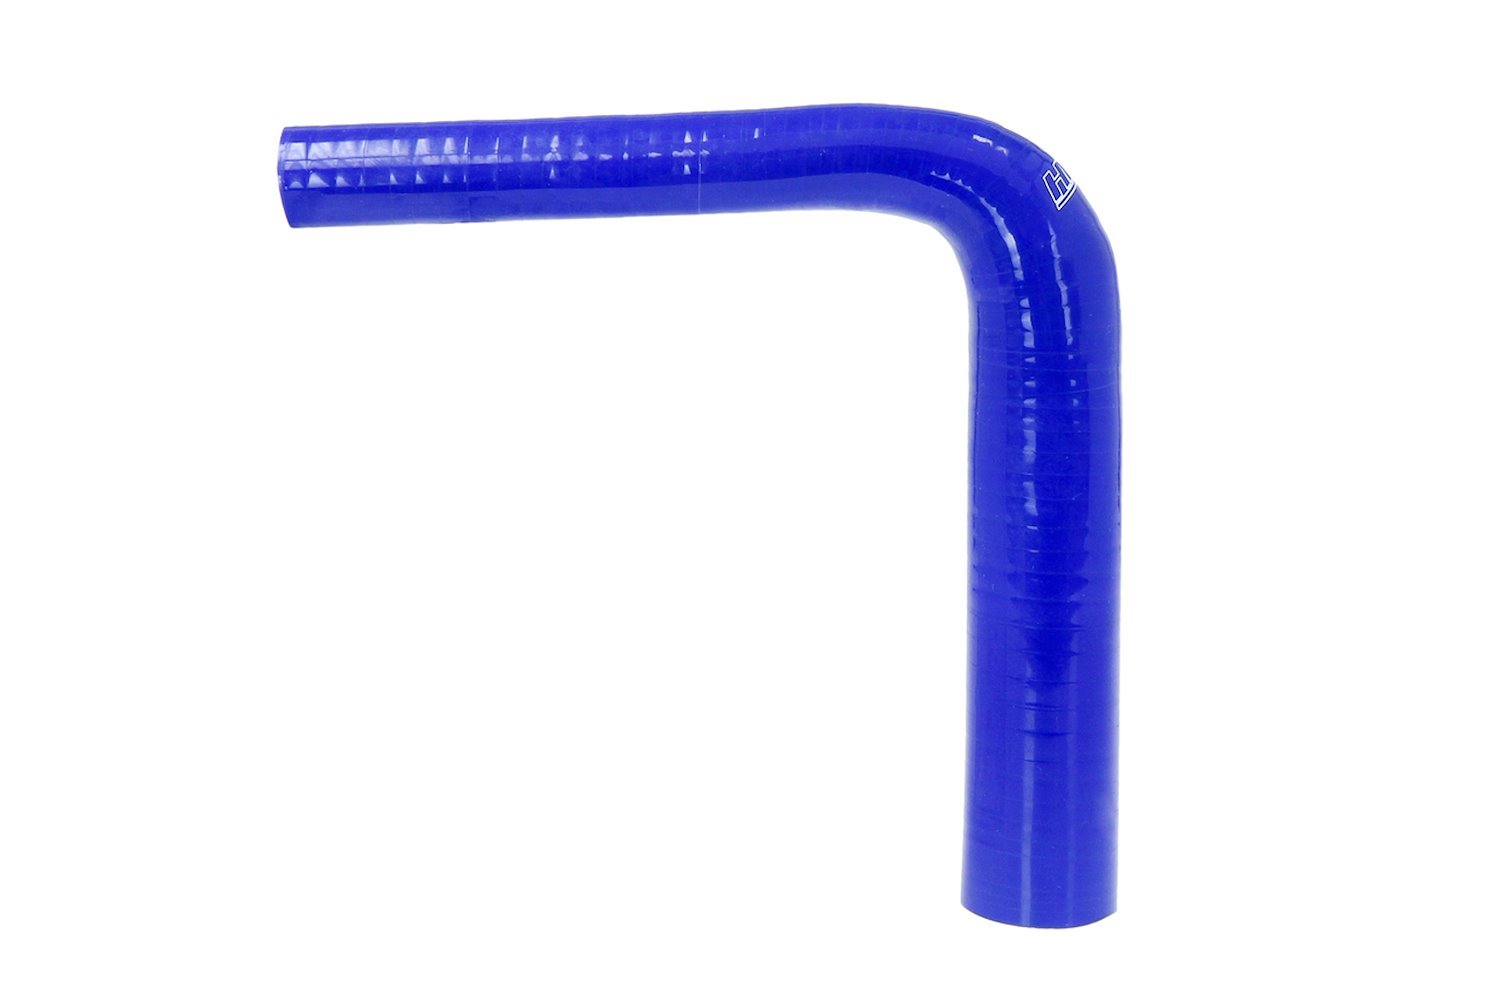 HTSER90-138-150-BLUE Silicone 90-Degree Elbow Hose, High-Temp 4-Ply Reinforced, 1-3/8 in. - 1-1/2 in. ID, Blue